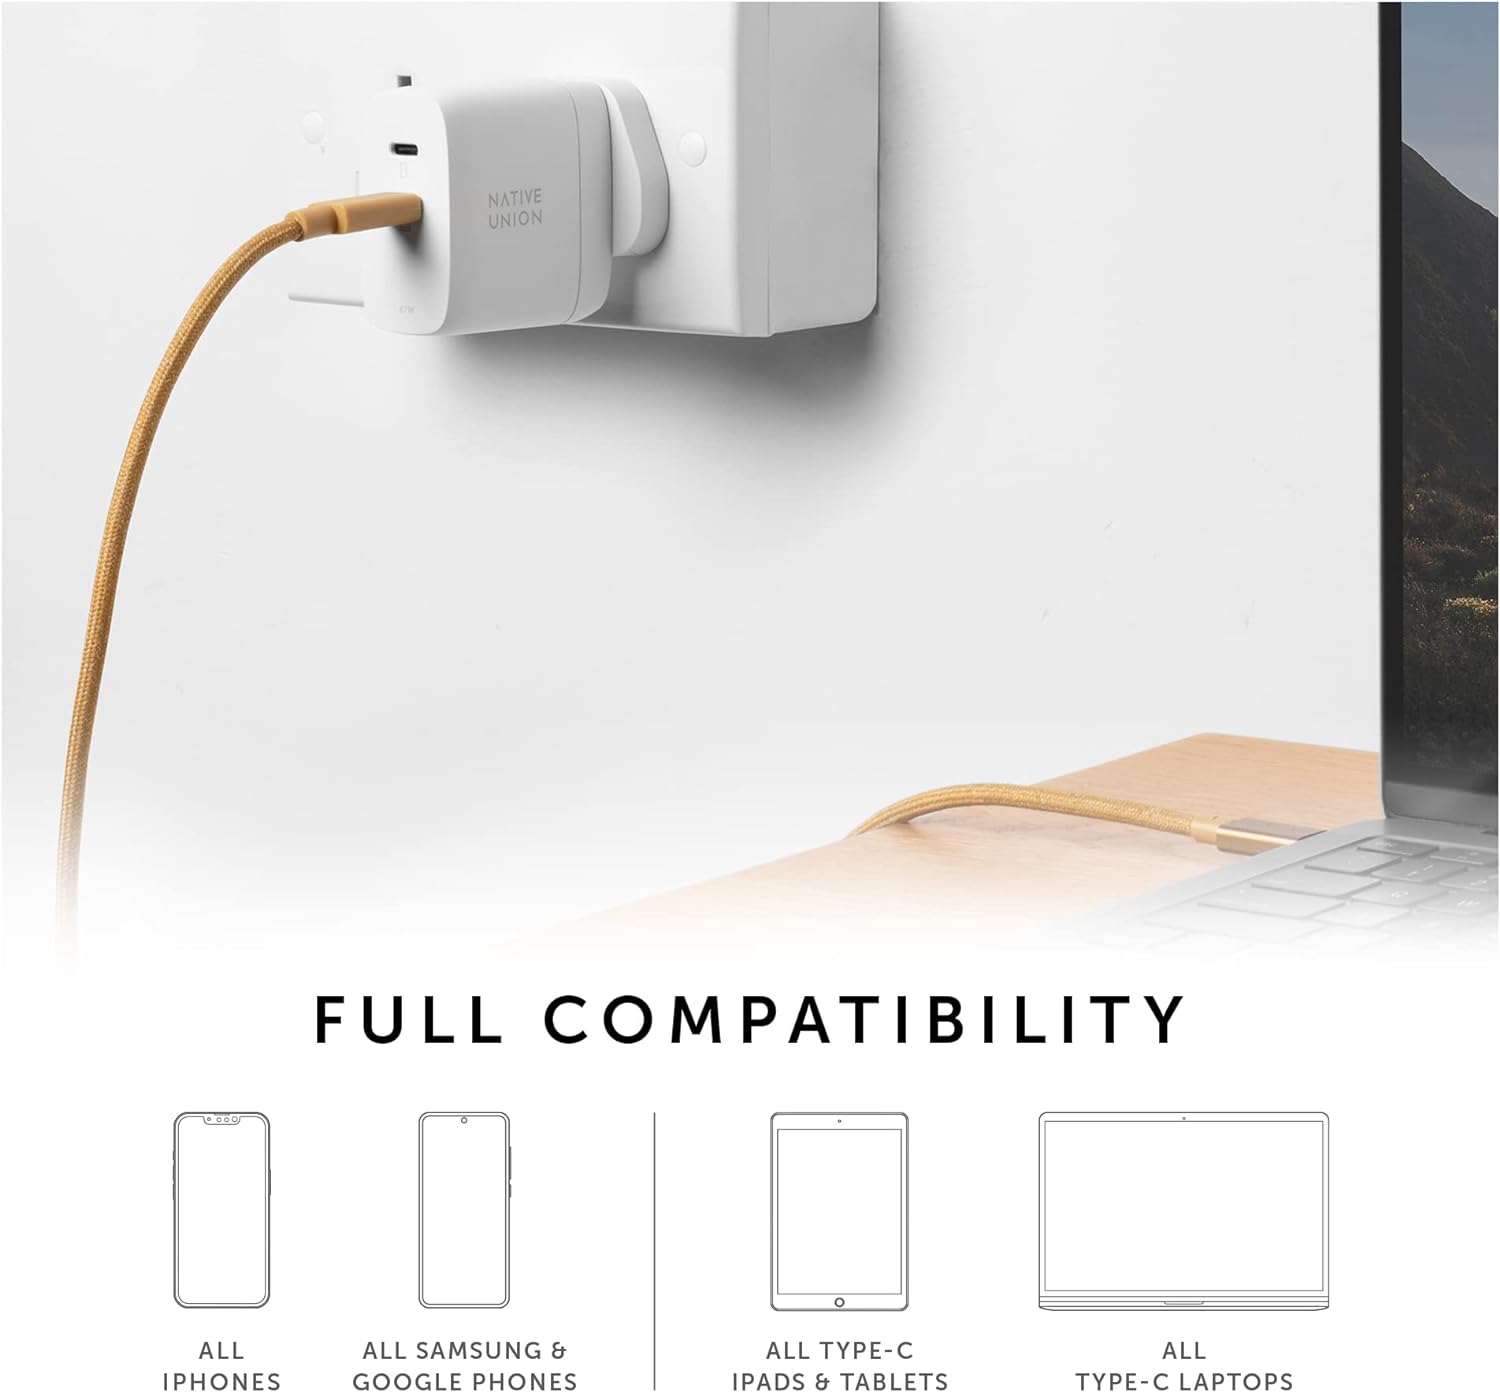 Native Union Fast GaN Charger PD 67W \u2013 Ultra-Compact Multi-Device Power Delivery Enabled USB-C Charger Up to 67W \u2013 for MacBook Pro, iPads, iPhones, Pixel, Galaxy & Other Type-C Devices (White)